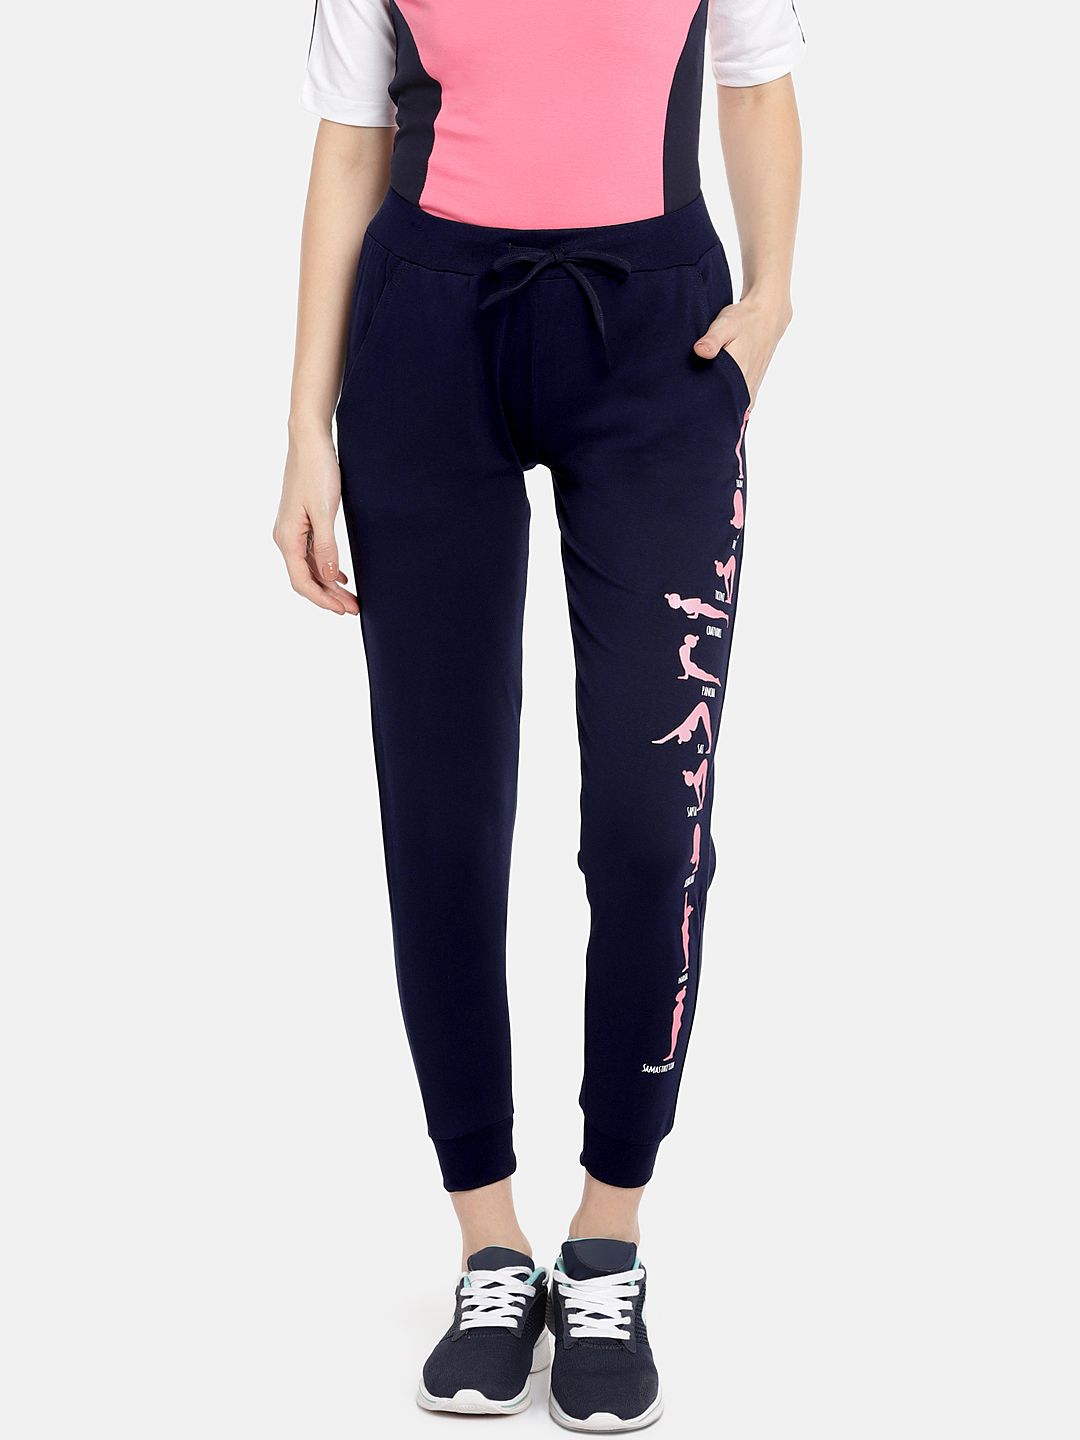 Tuna London Women Navy Blue and Pink Solid Joggers Price in India